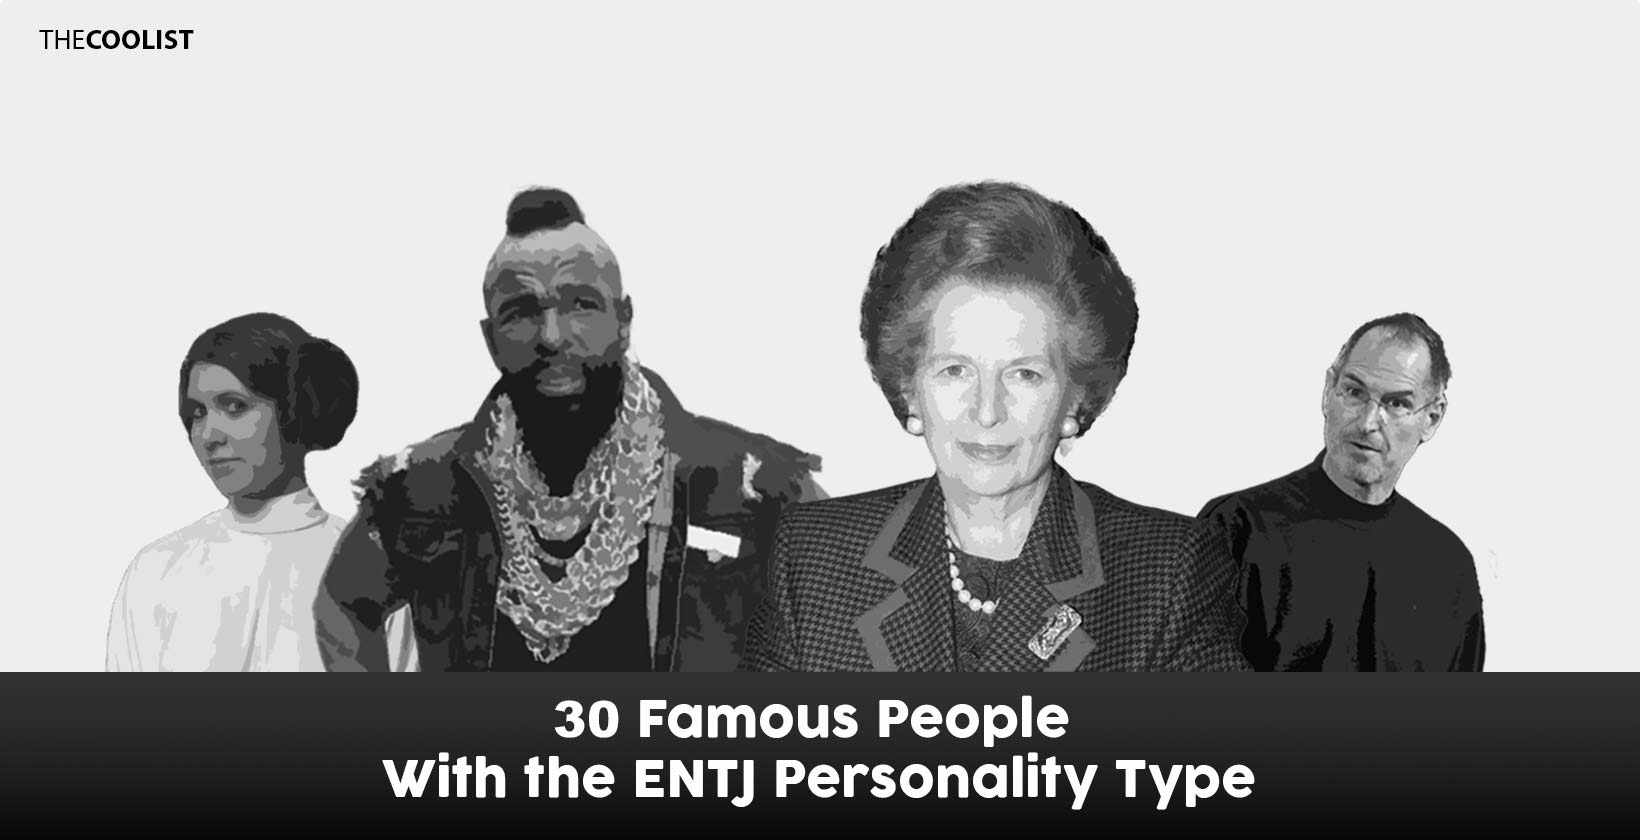 30 Famous ENTJ People and Fictional Characters